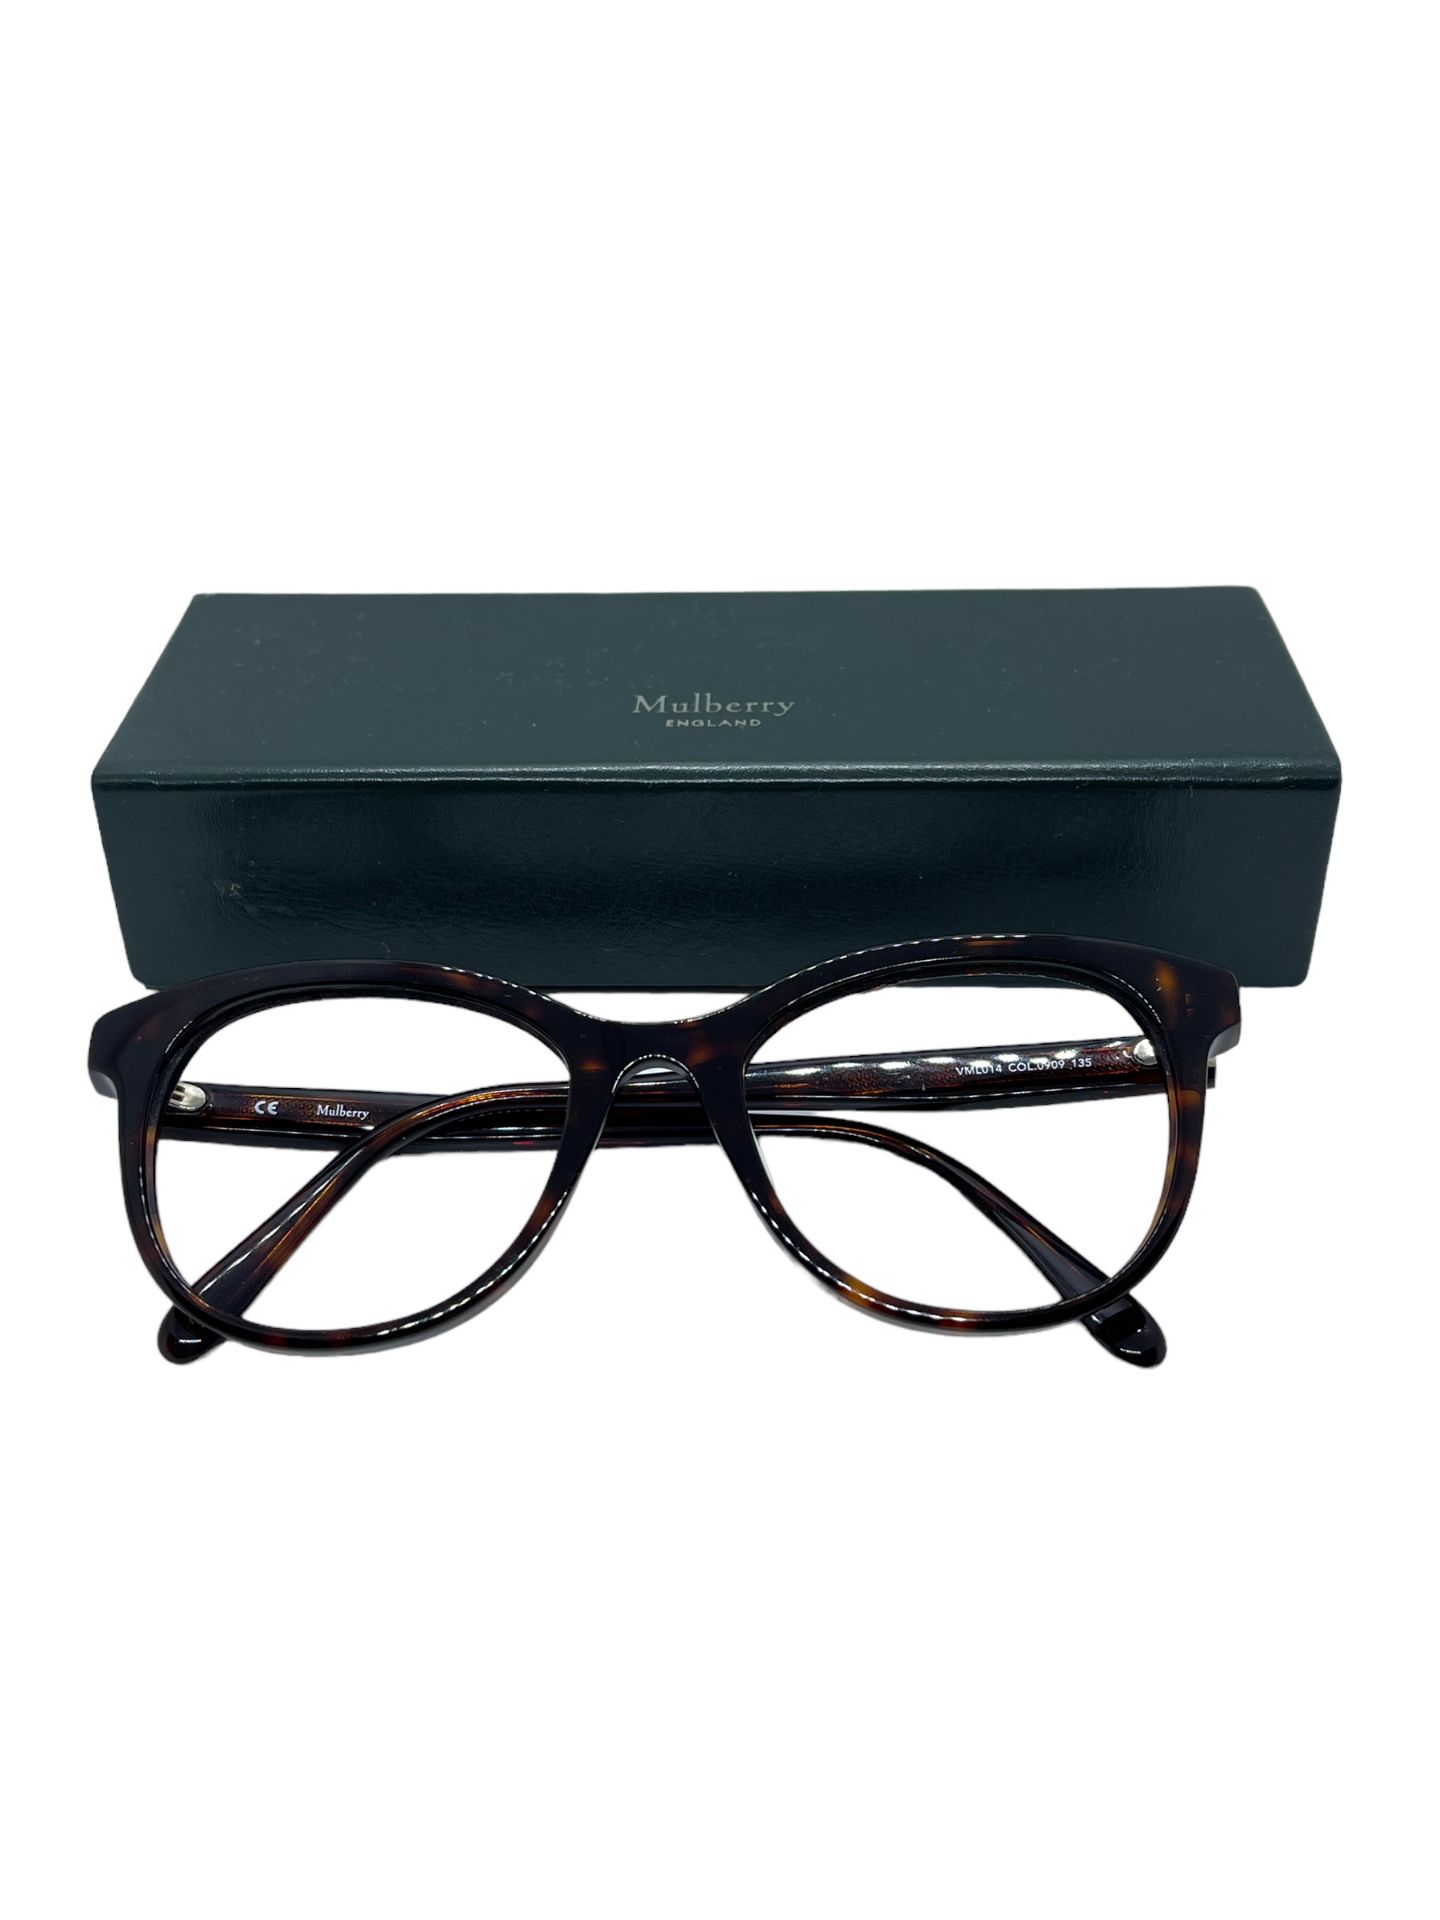 Mulberry Specticals xdemo boxed case unisex - Image 4 of 6